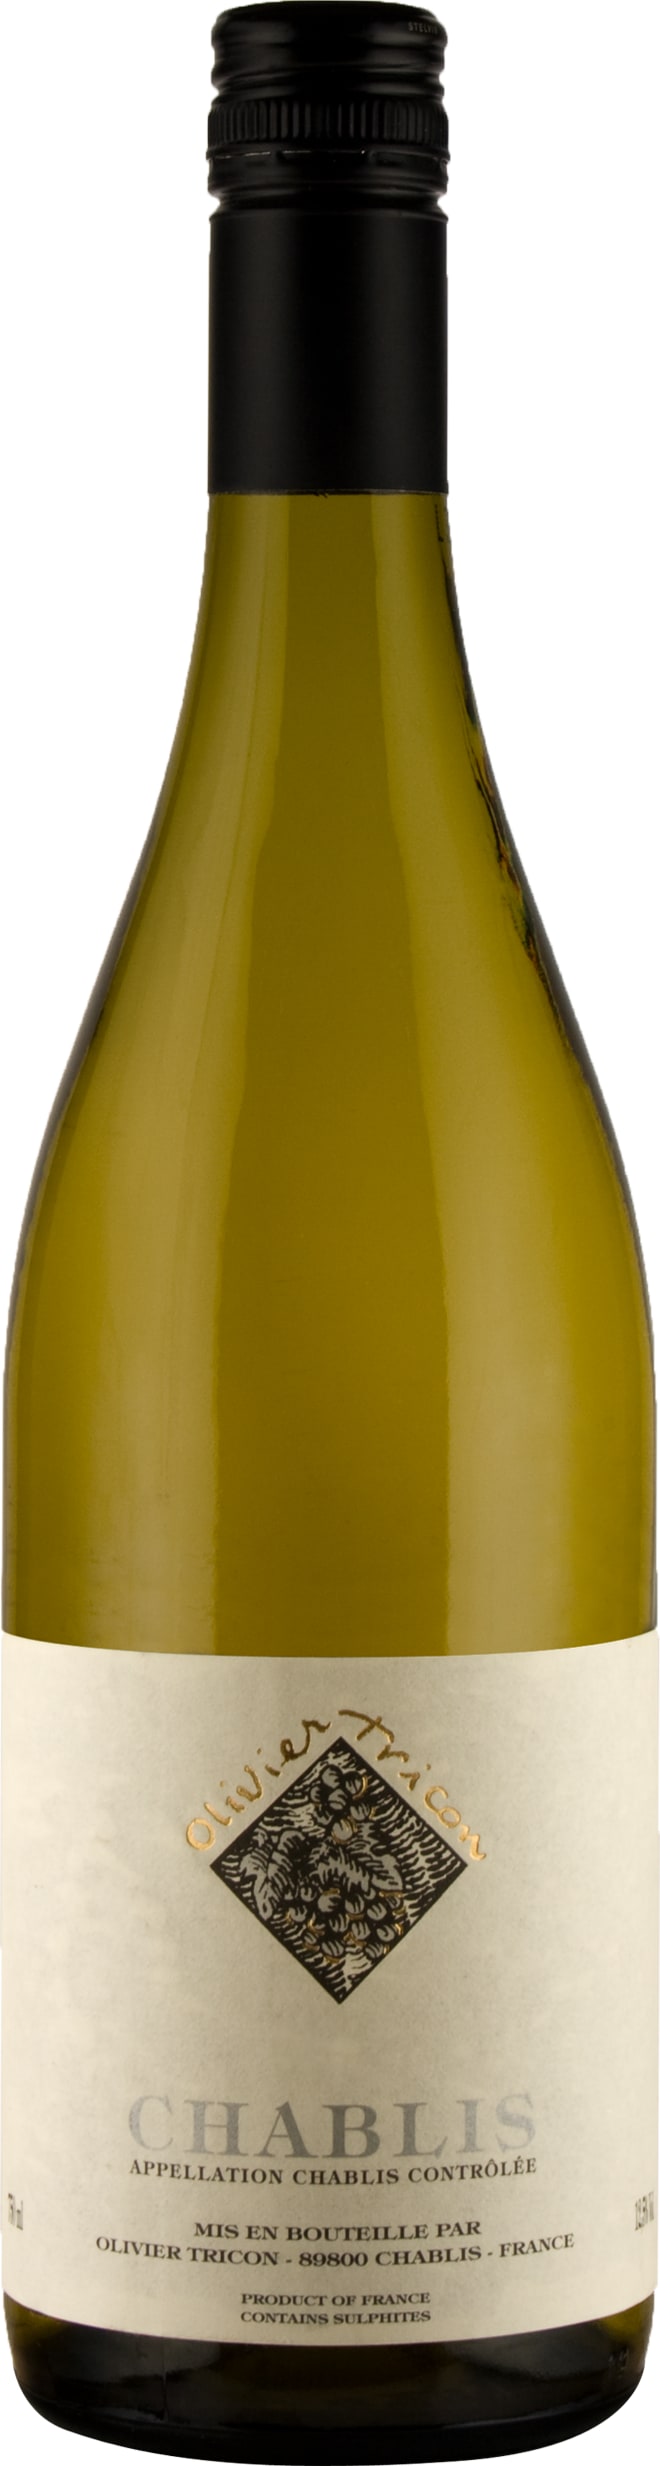 Olivier Tricon Chablis 2022 75cl - Buy Olivier Tricon Wines from GREAT WINES DIRECT wine shop